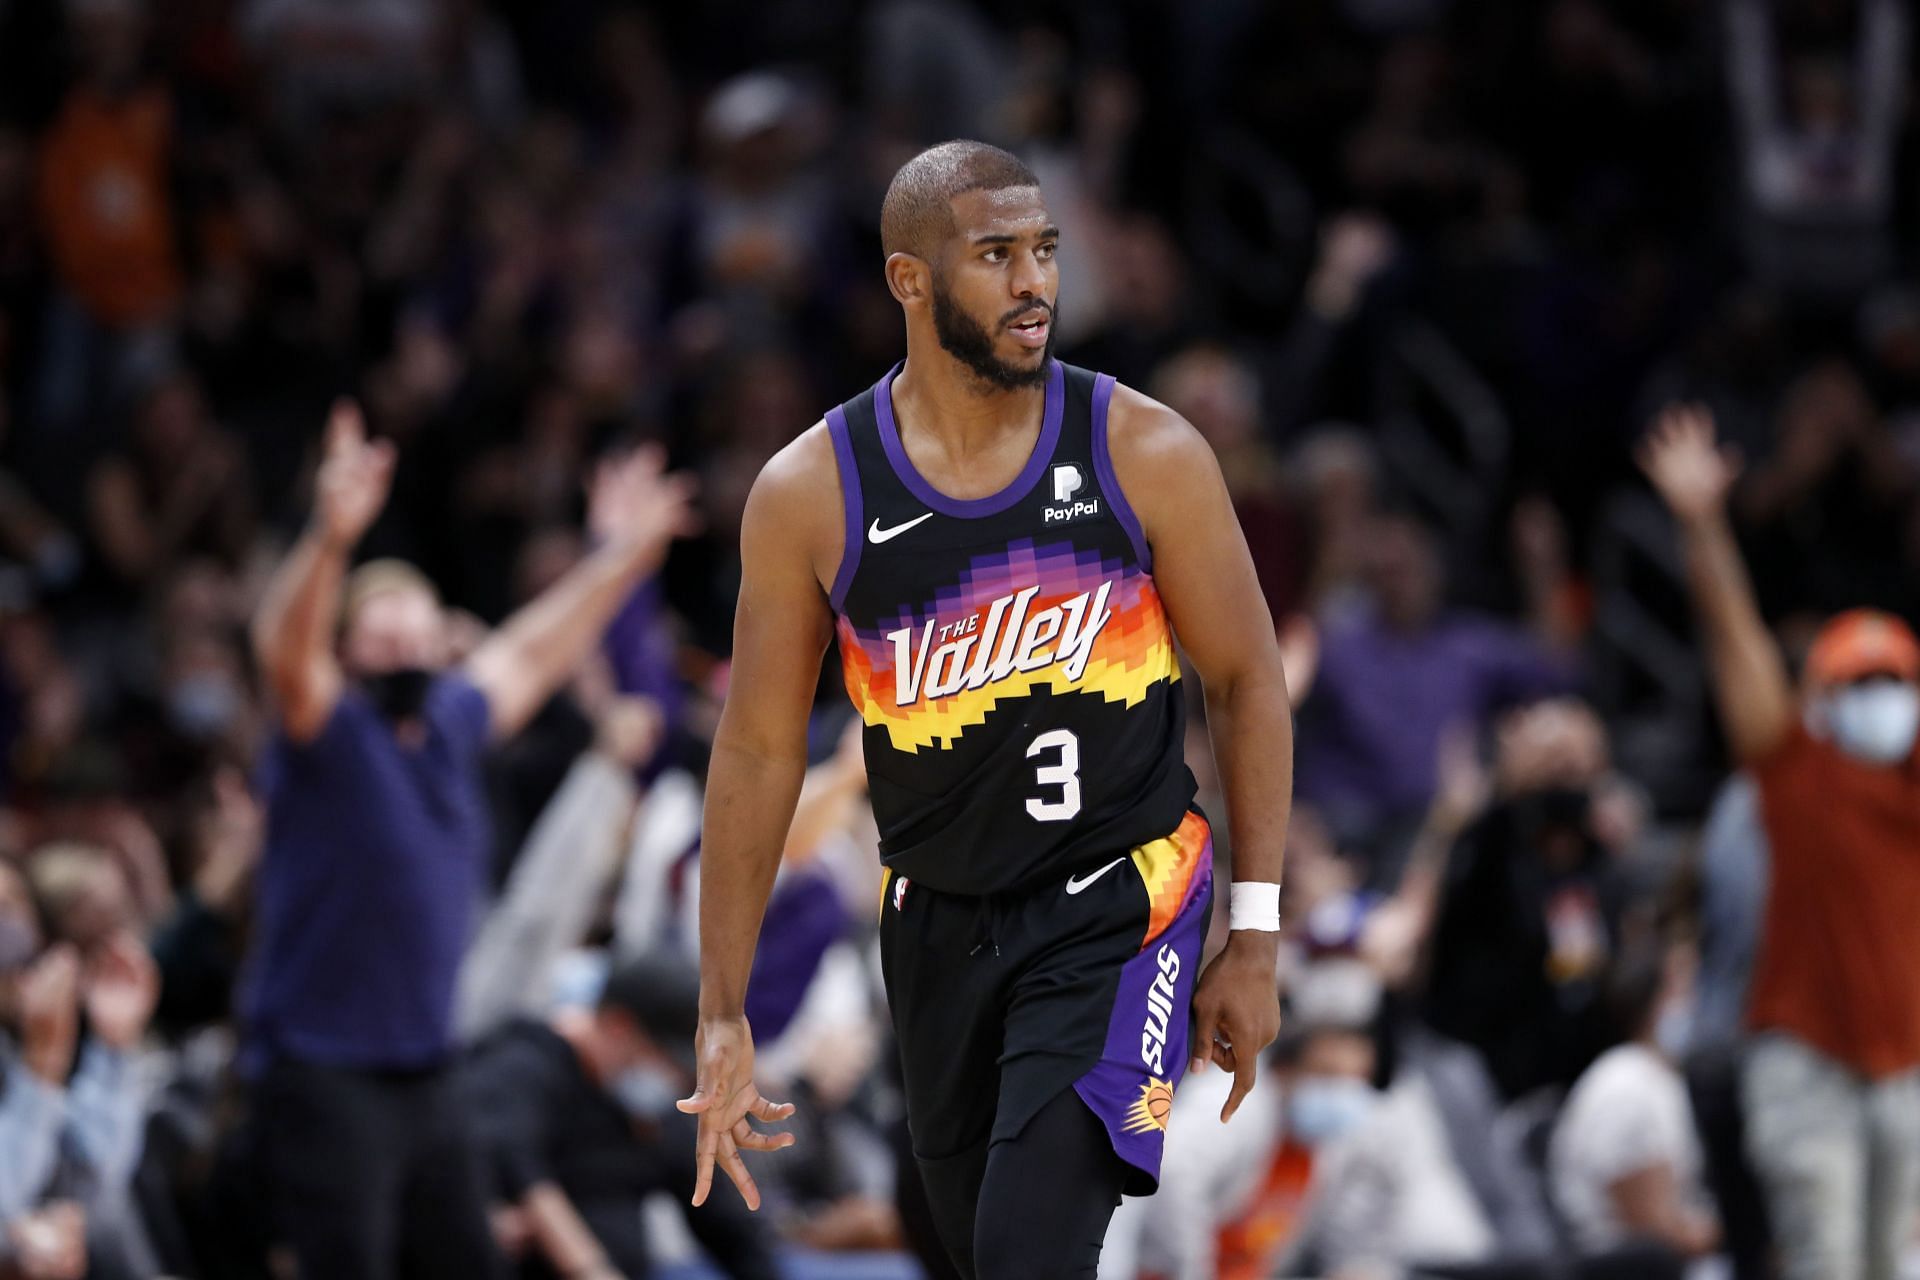 The Phoenix Suns will be without Chris Paul for this game